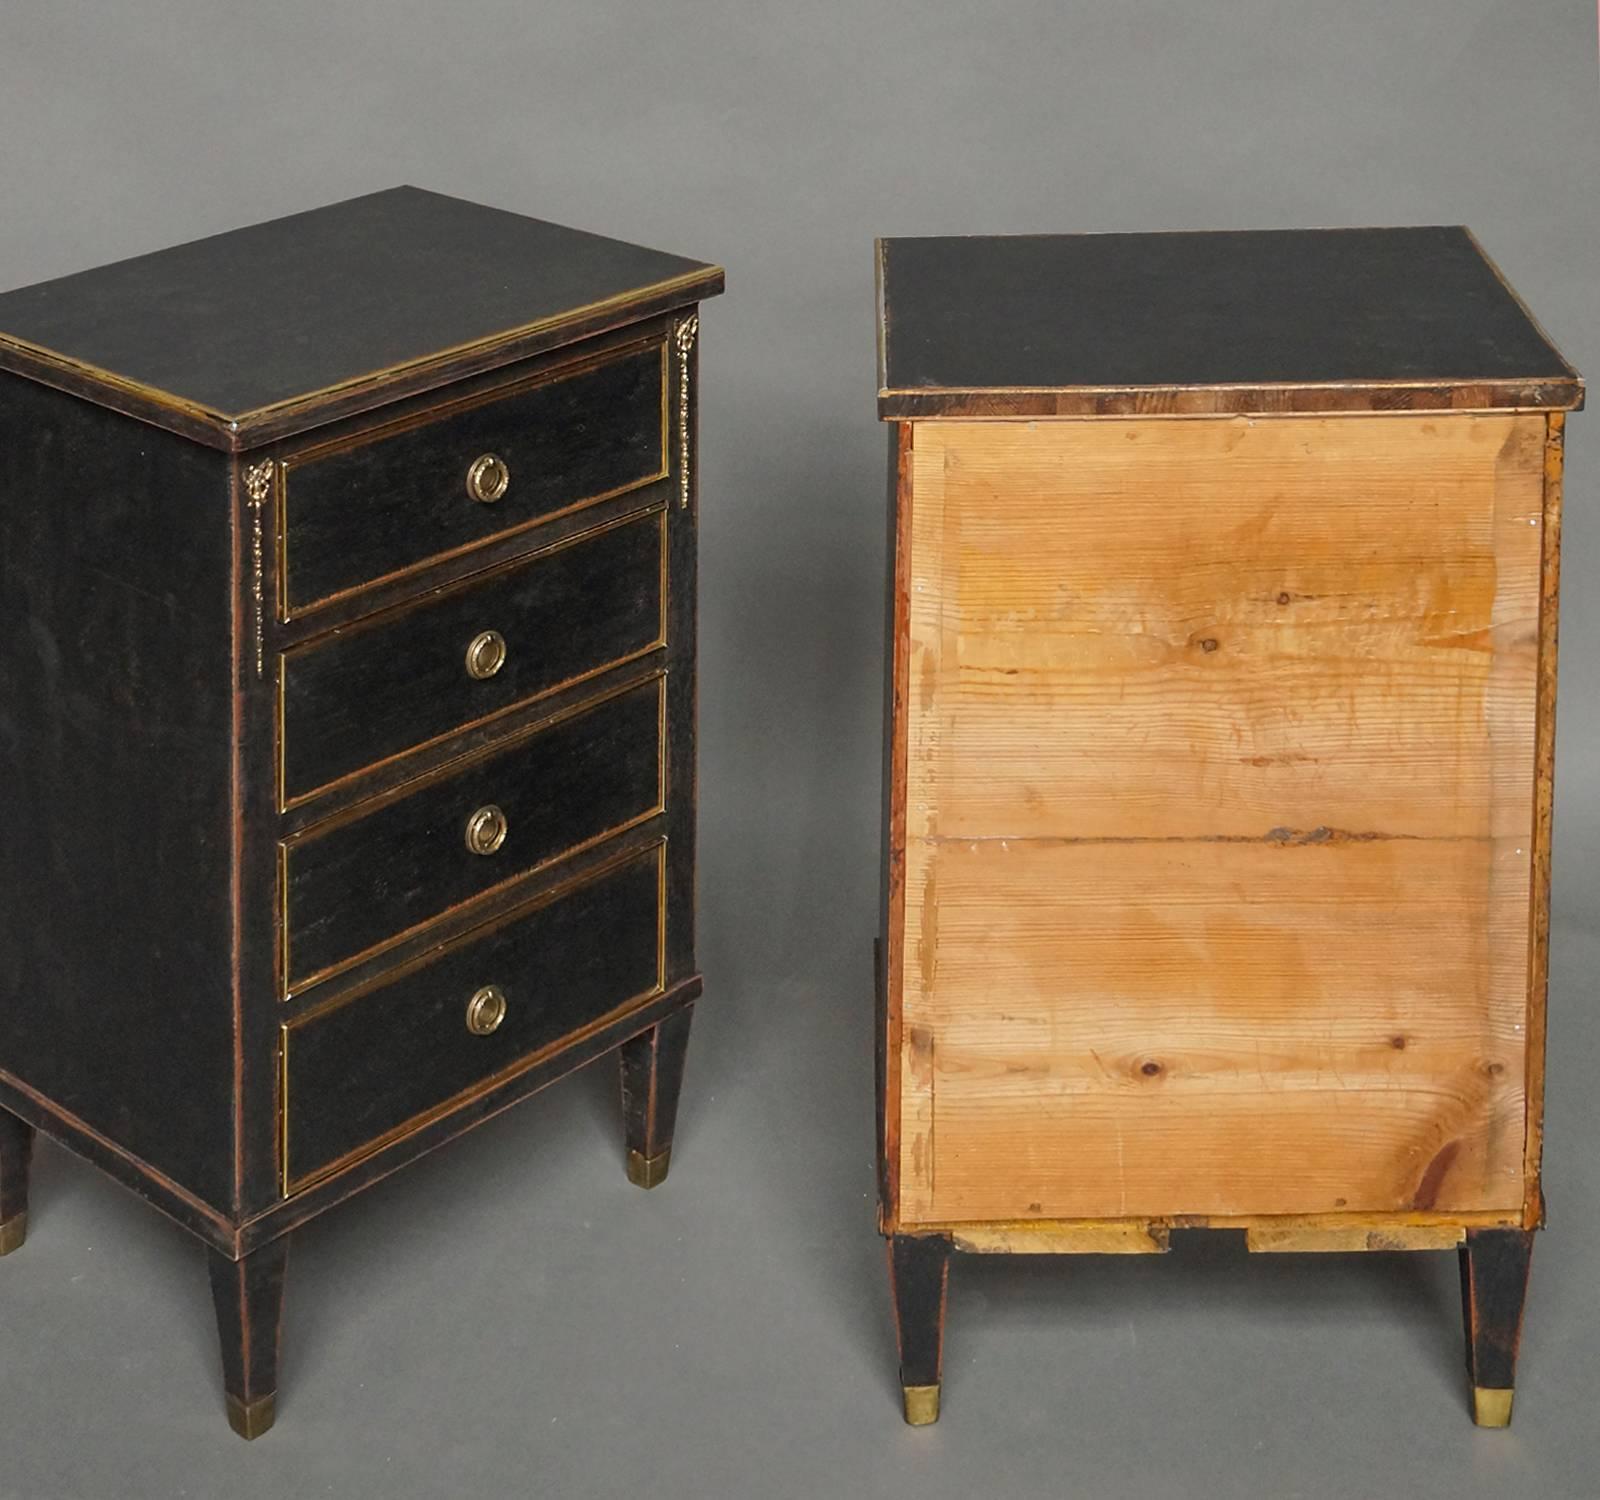 19th Century Pair of Swedish Commodes with Brass Fittings